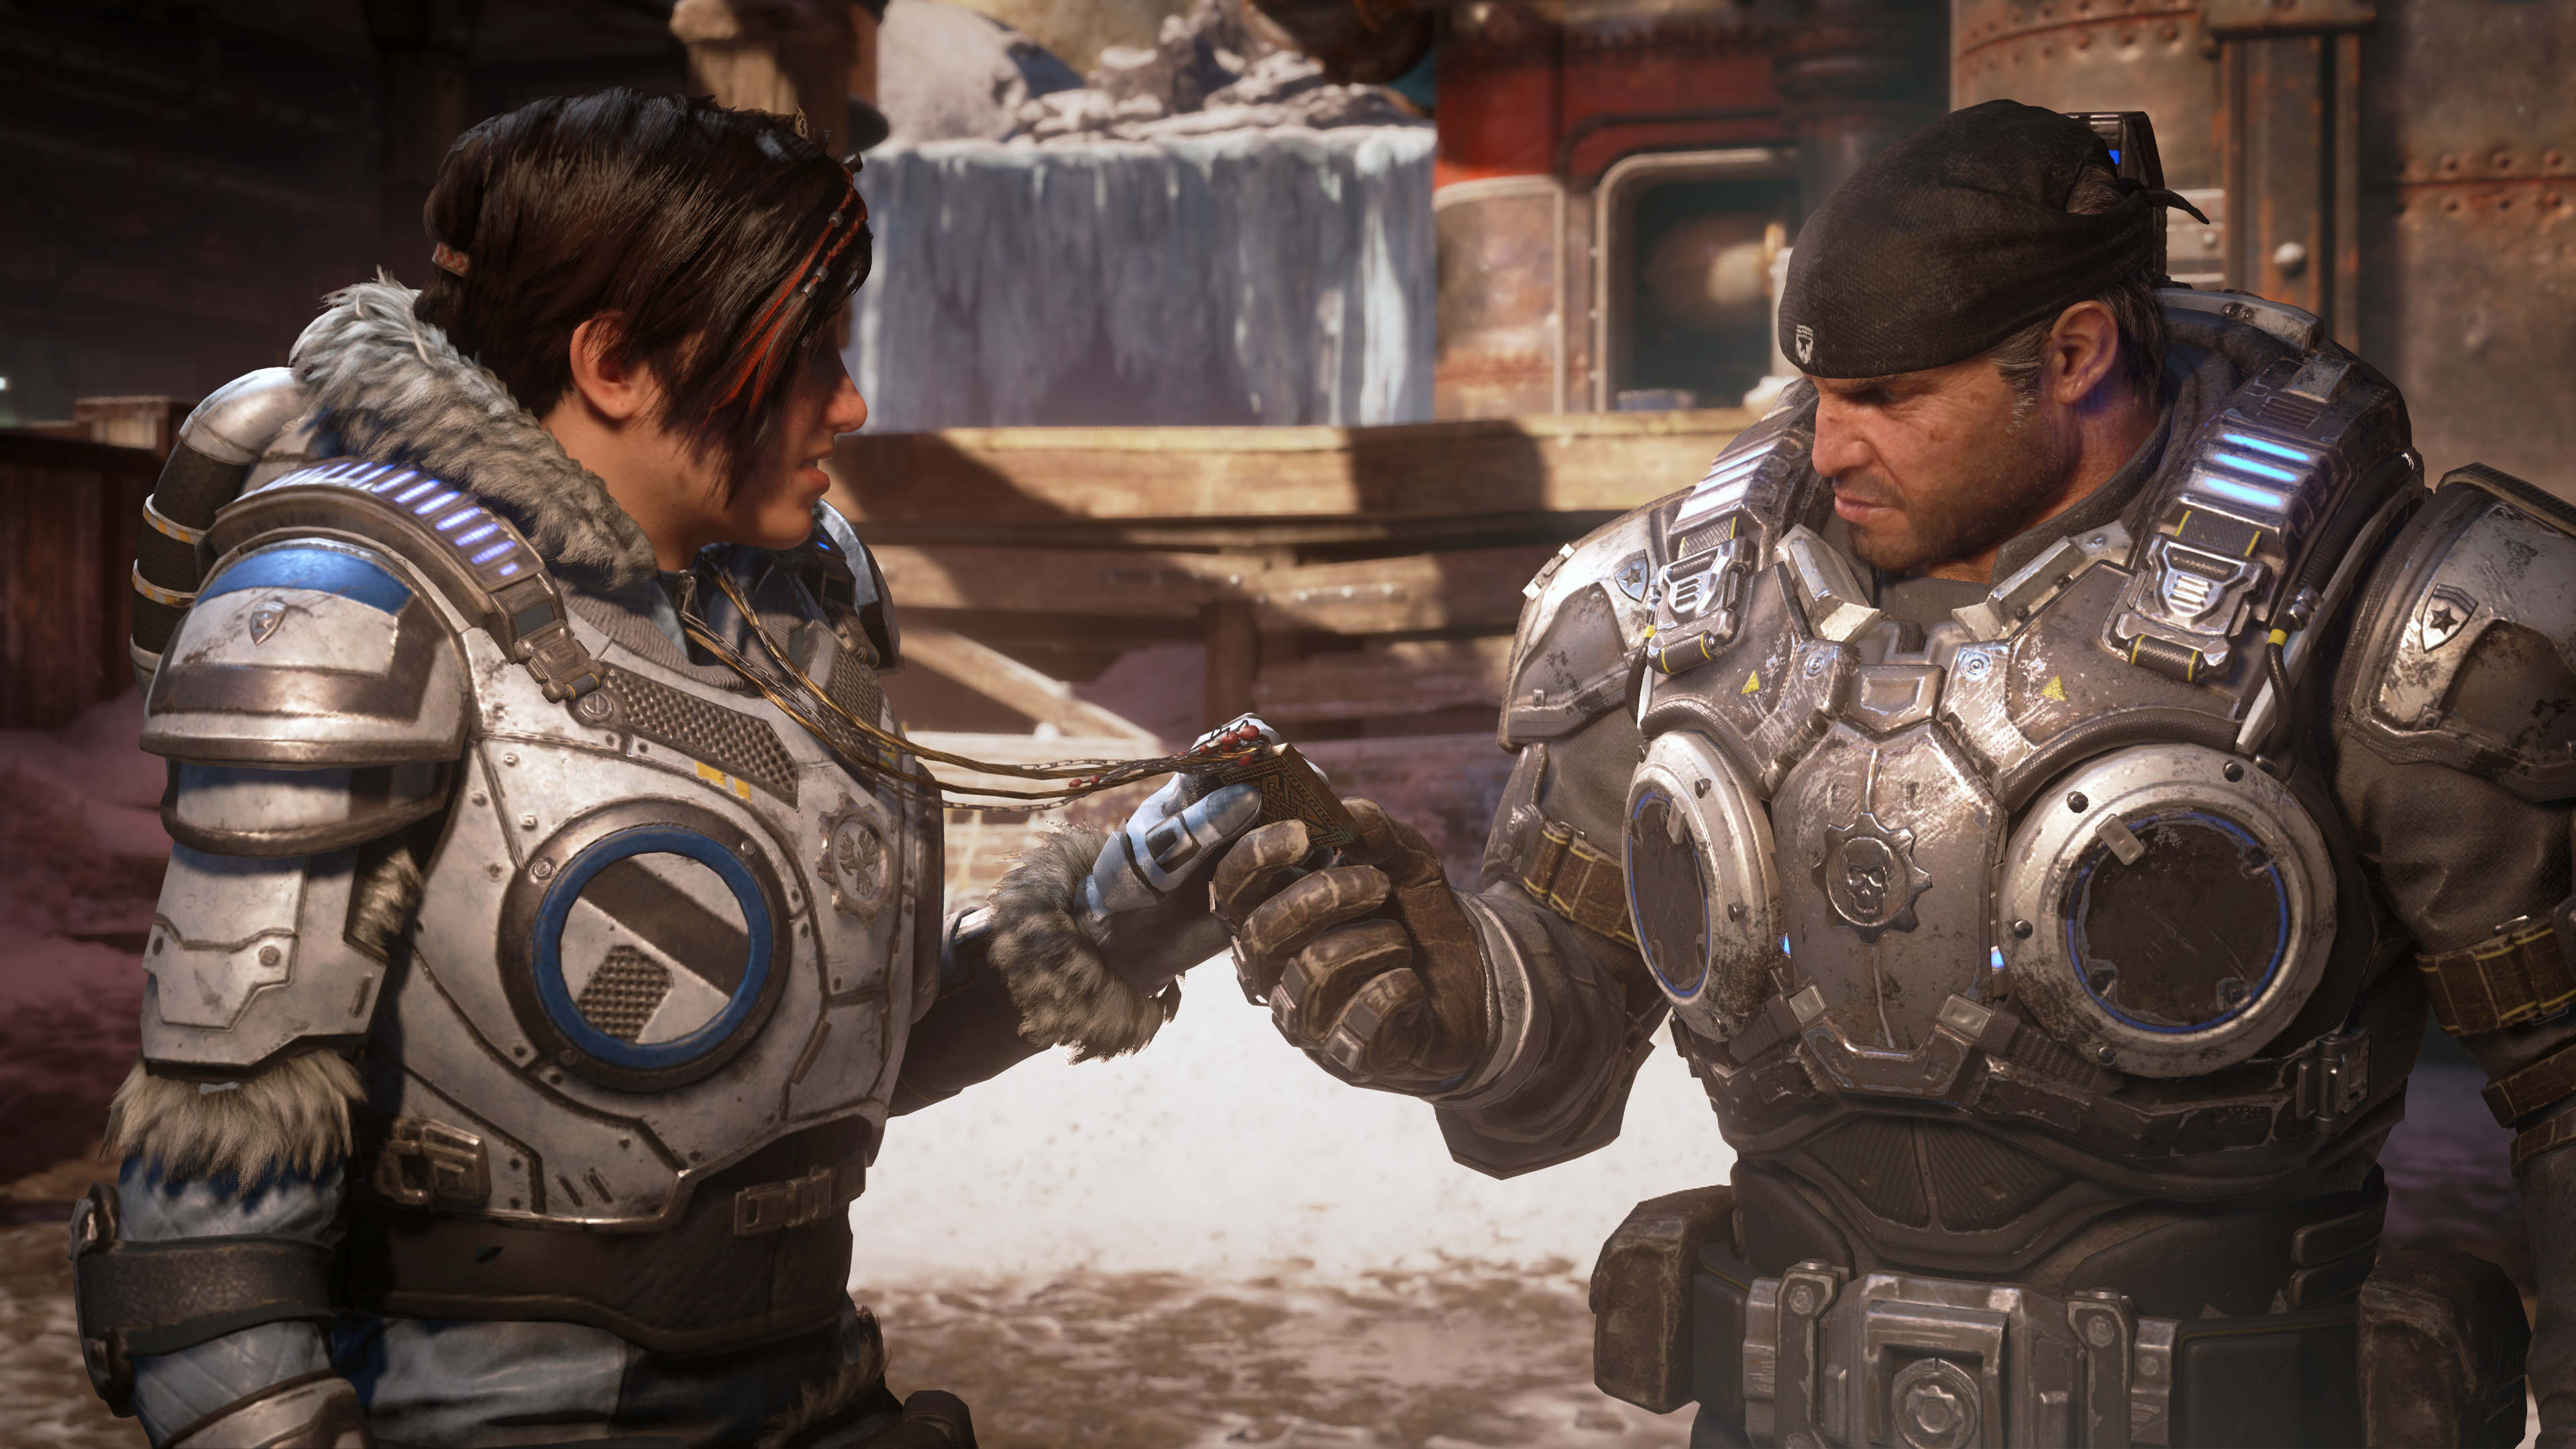 Gears 5 Dev Refused To Compromise On 60FPS Frame Rate - GameSpot